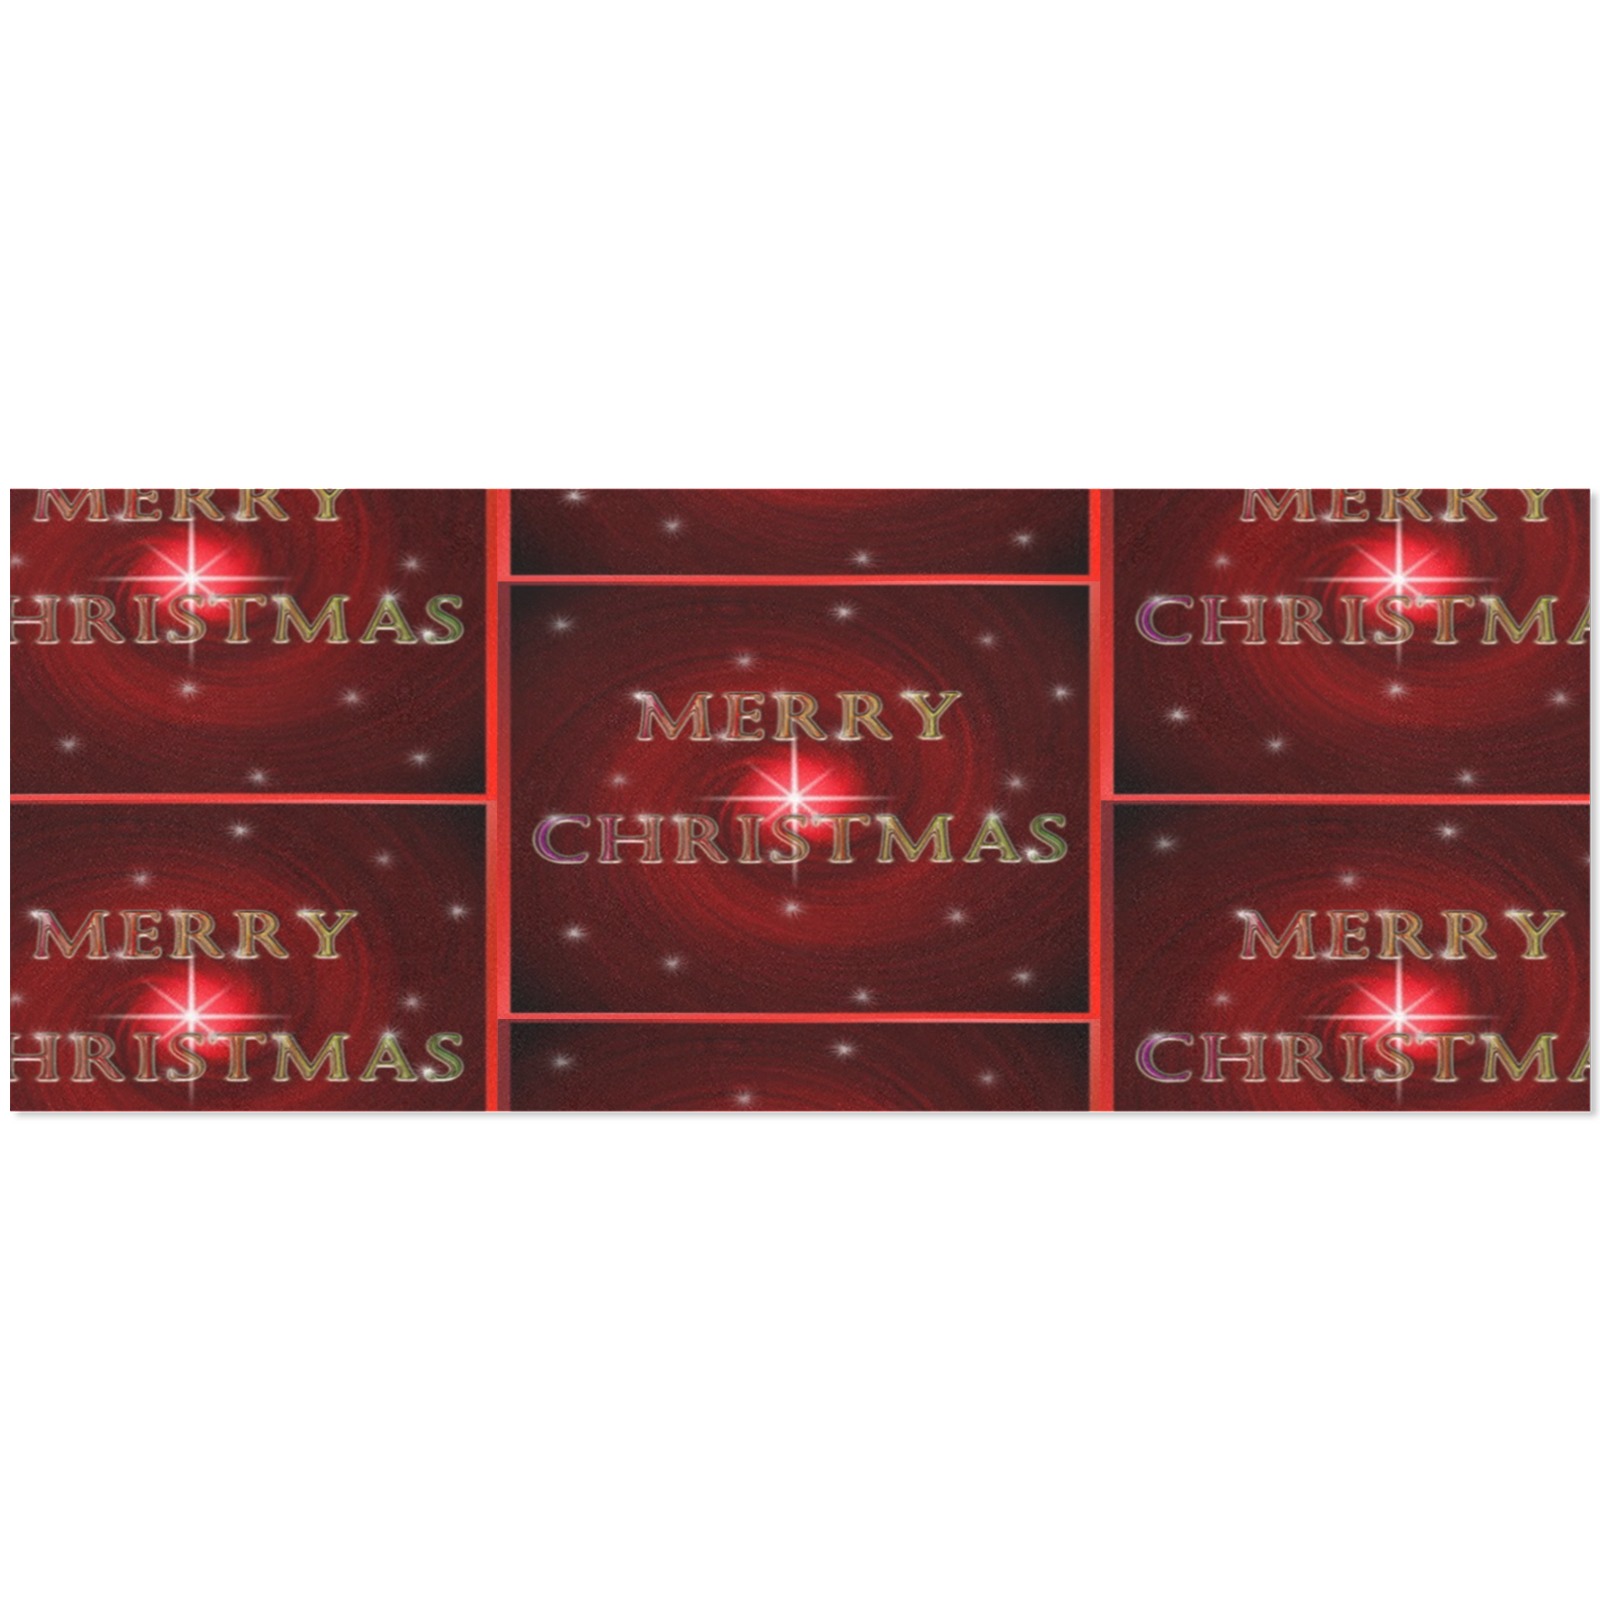 Red Vortex Gift Wrapping Paper 58"x 23" (2 Rolls)